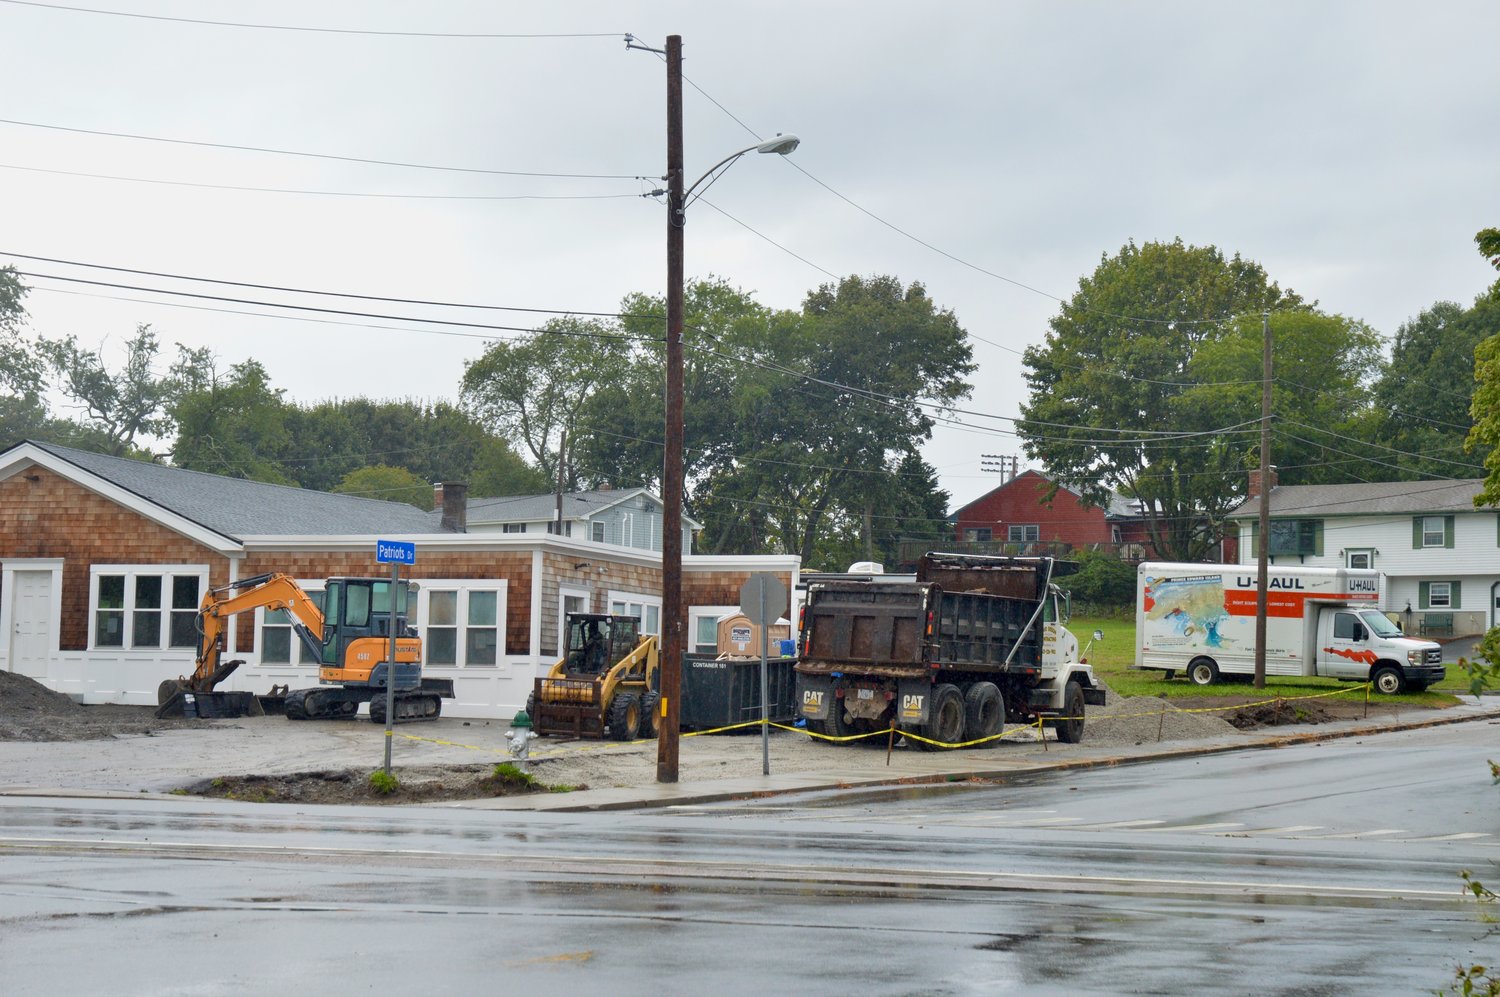 The contractor for Rhode Island Oak Counseling and Wellness, a new business where the old Kaufman's Hardware used to sit, plans to put in a curb cut so vehicles can enter via East Main Road and exit onto Patriots Drive.